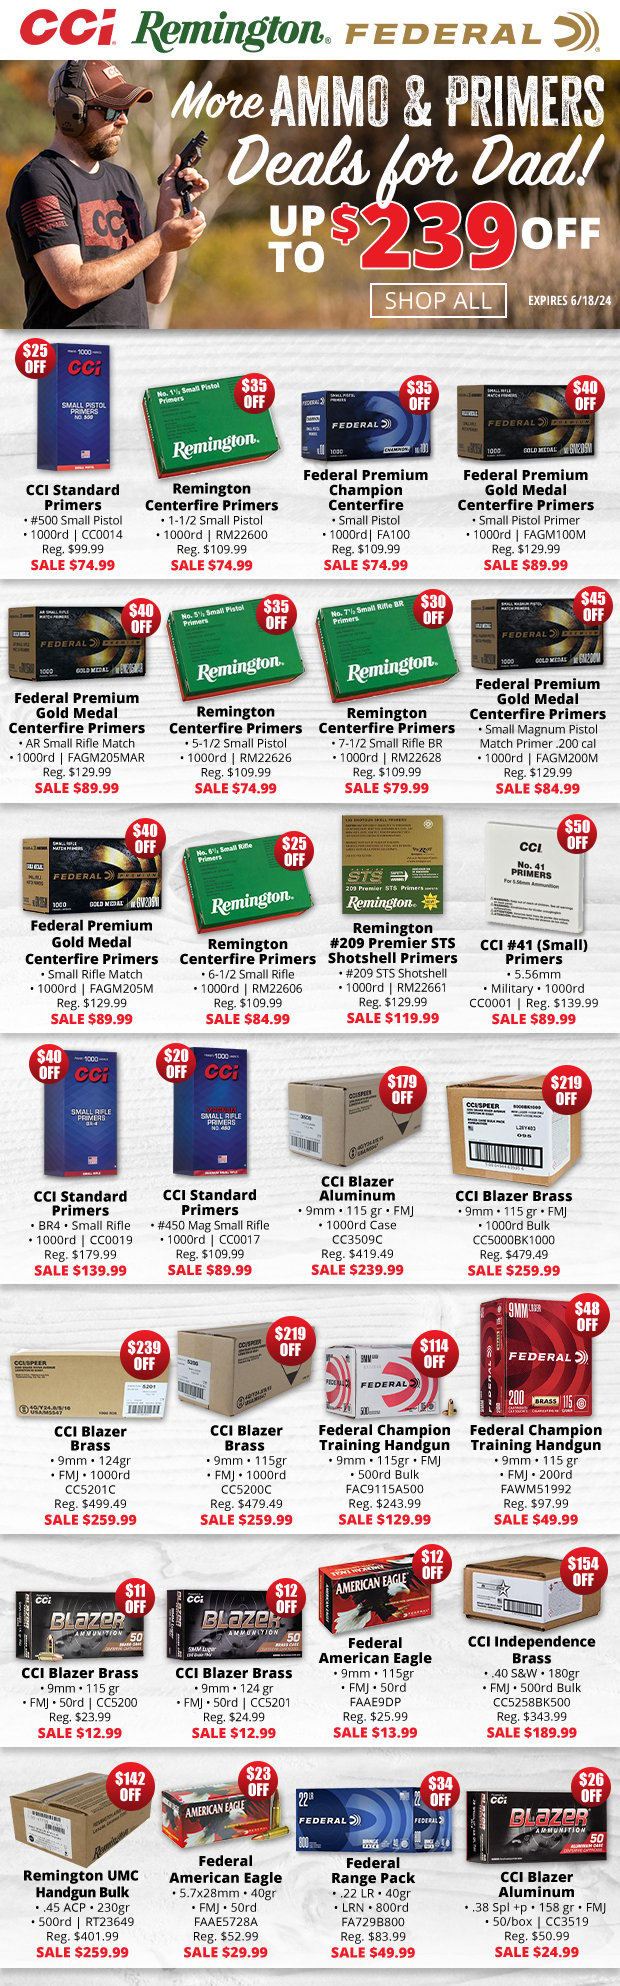 Up to $239 Off Ammo & Primers with Deals for Dad!